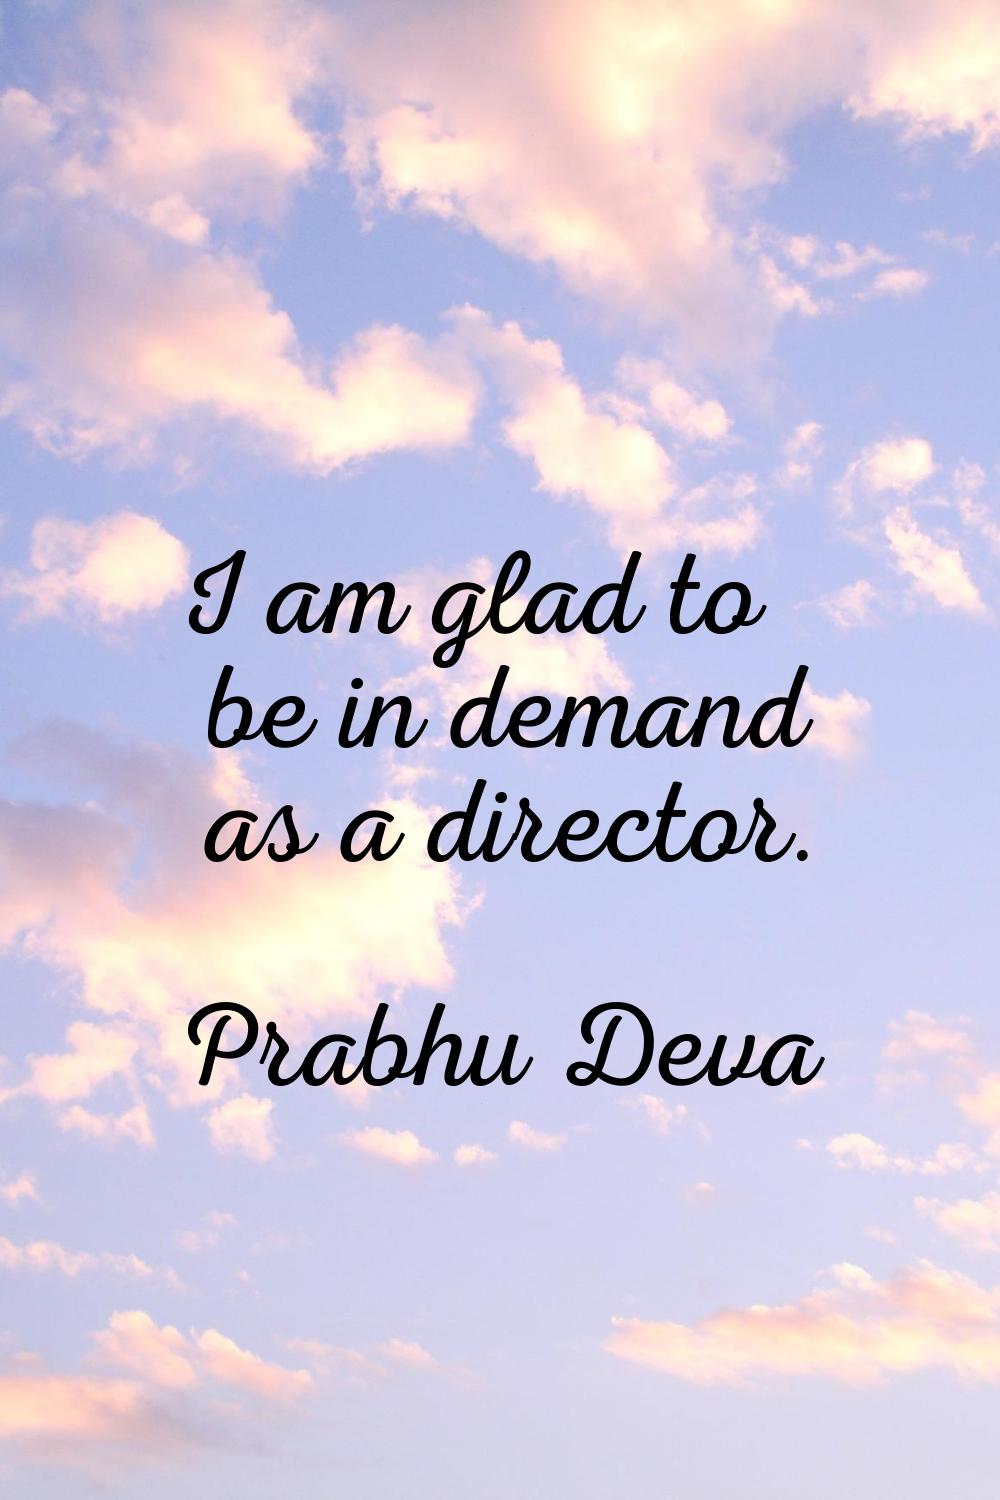 I am glad to be in demand as a director.